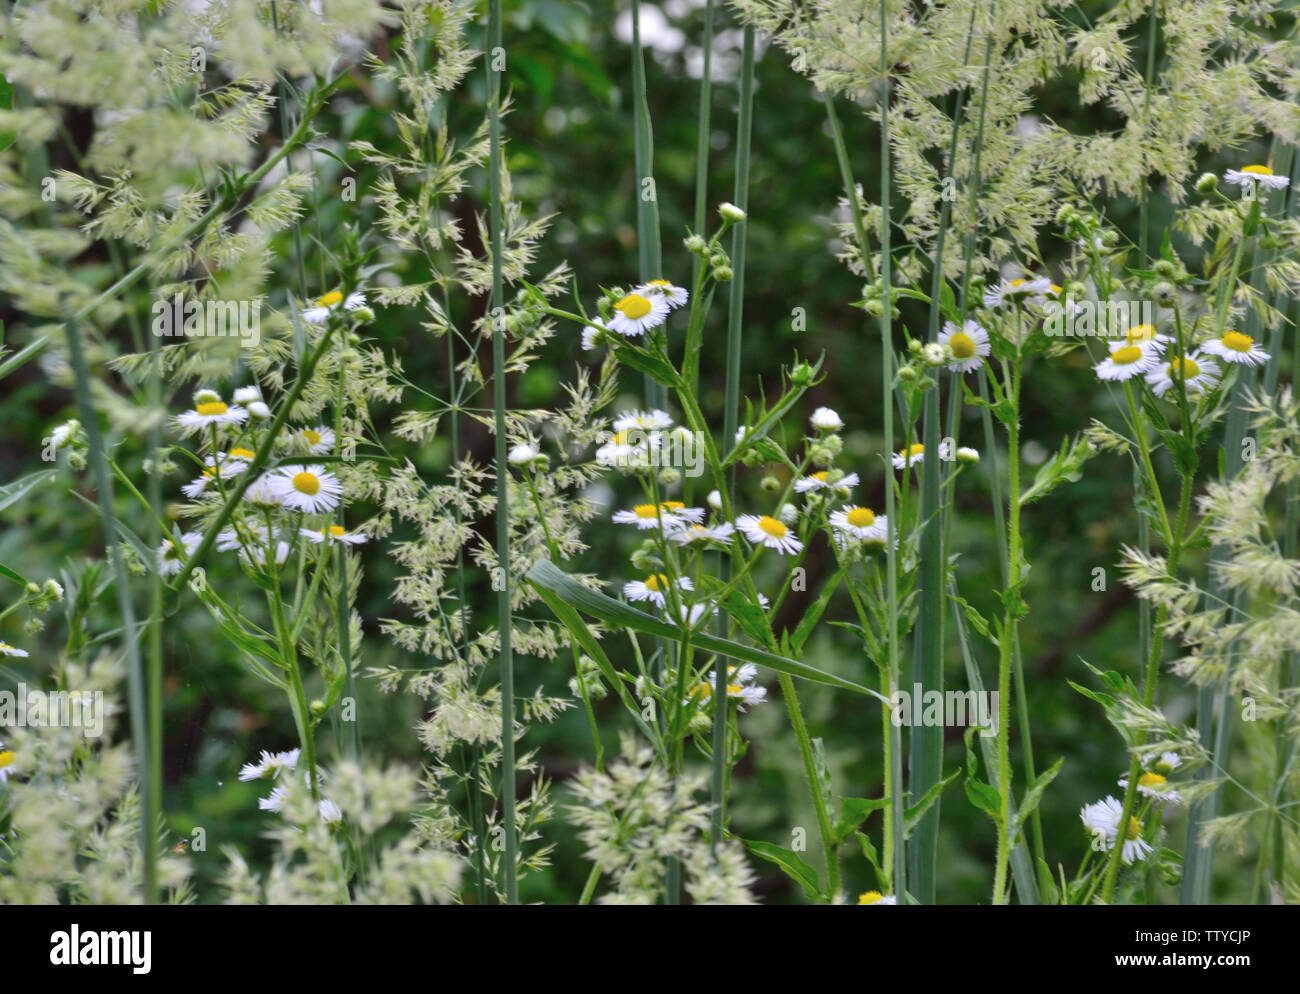 Blooming weeds Stock Photo